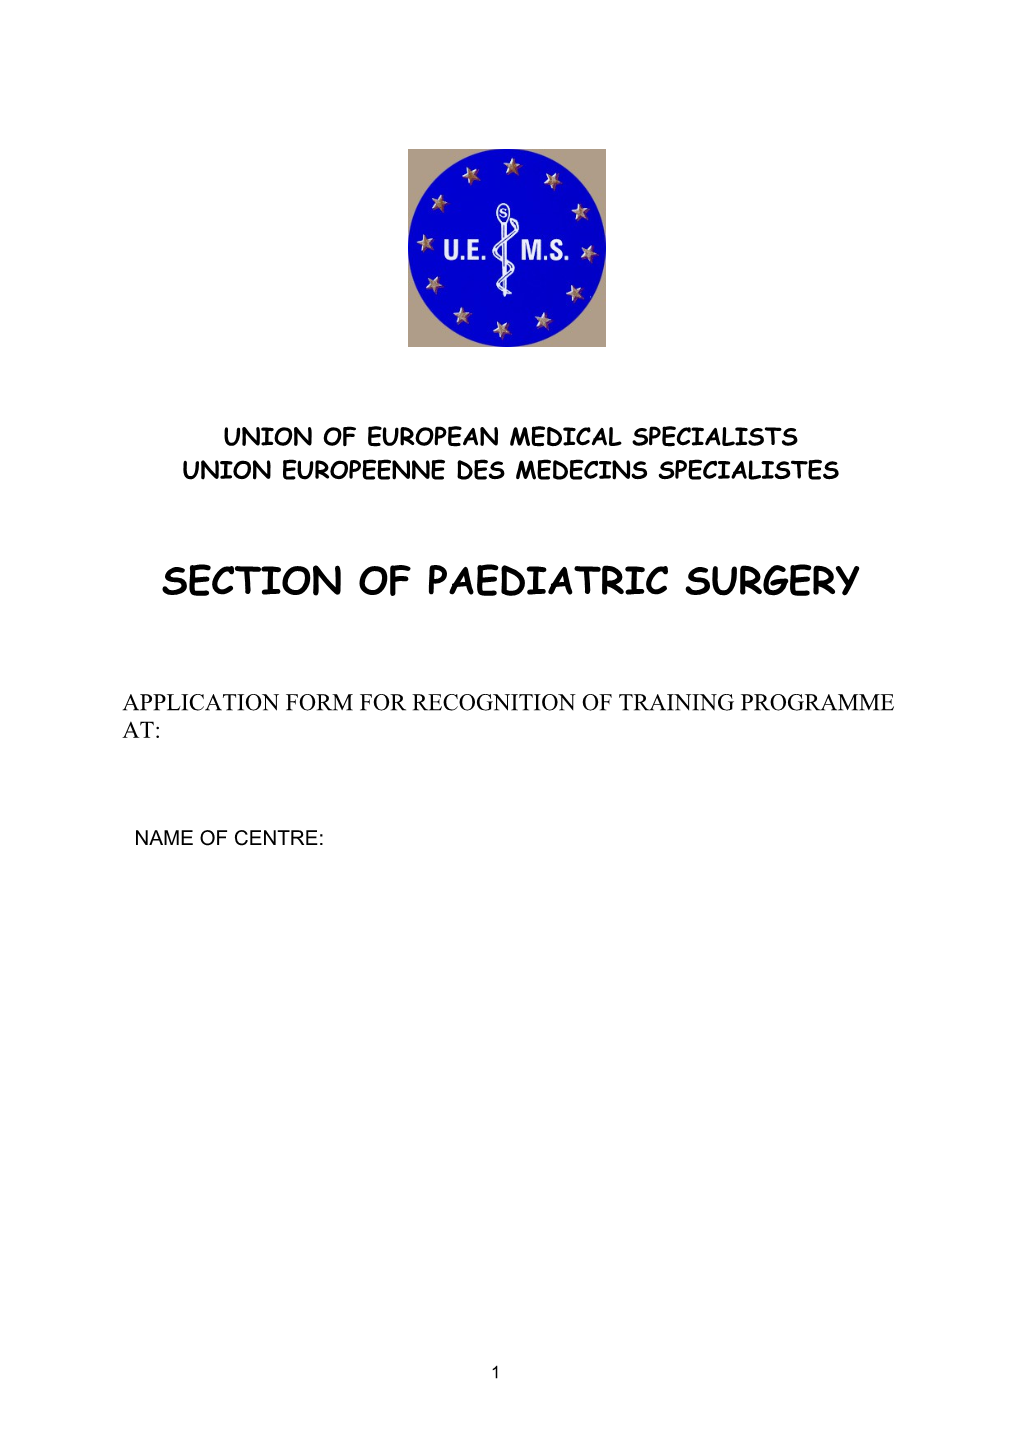 Union of European Medical Specialists